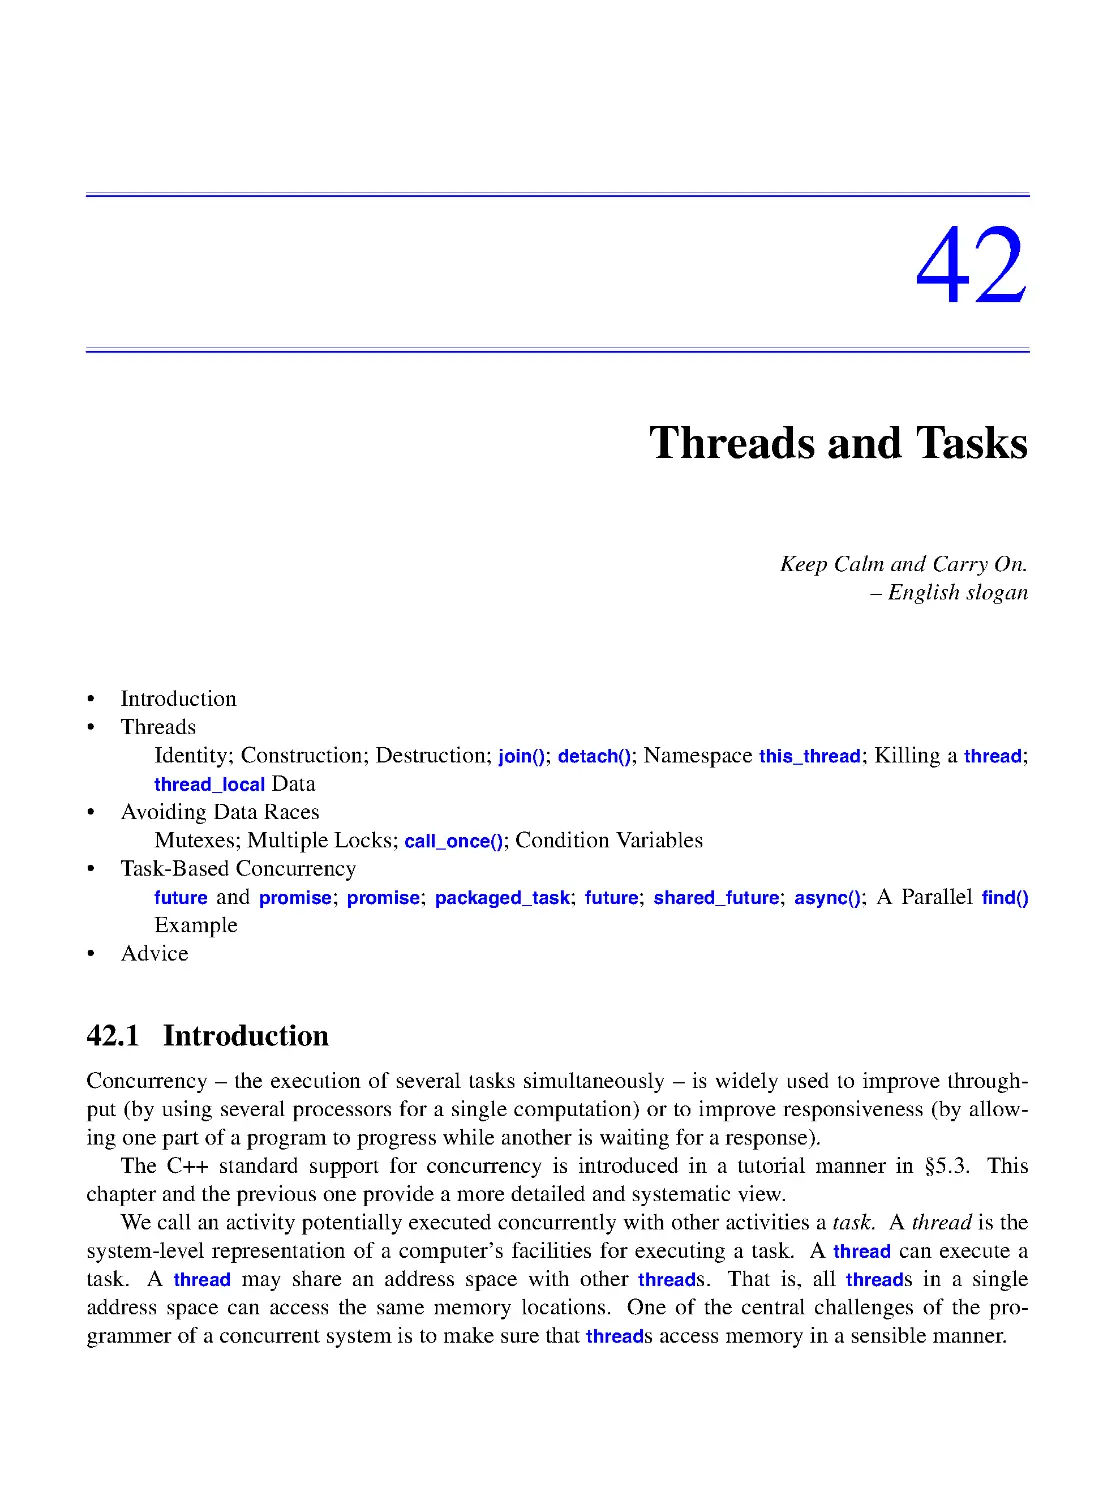 42. Threads and Tasks